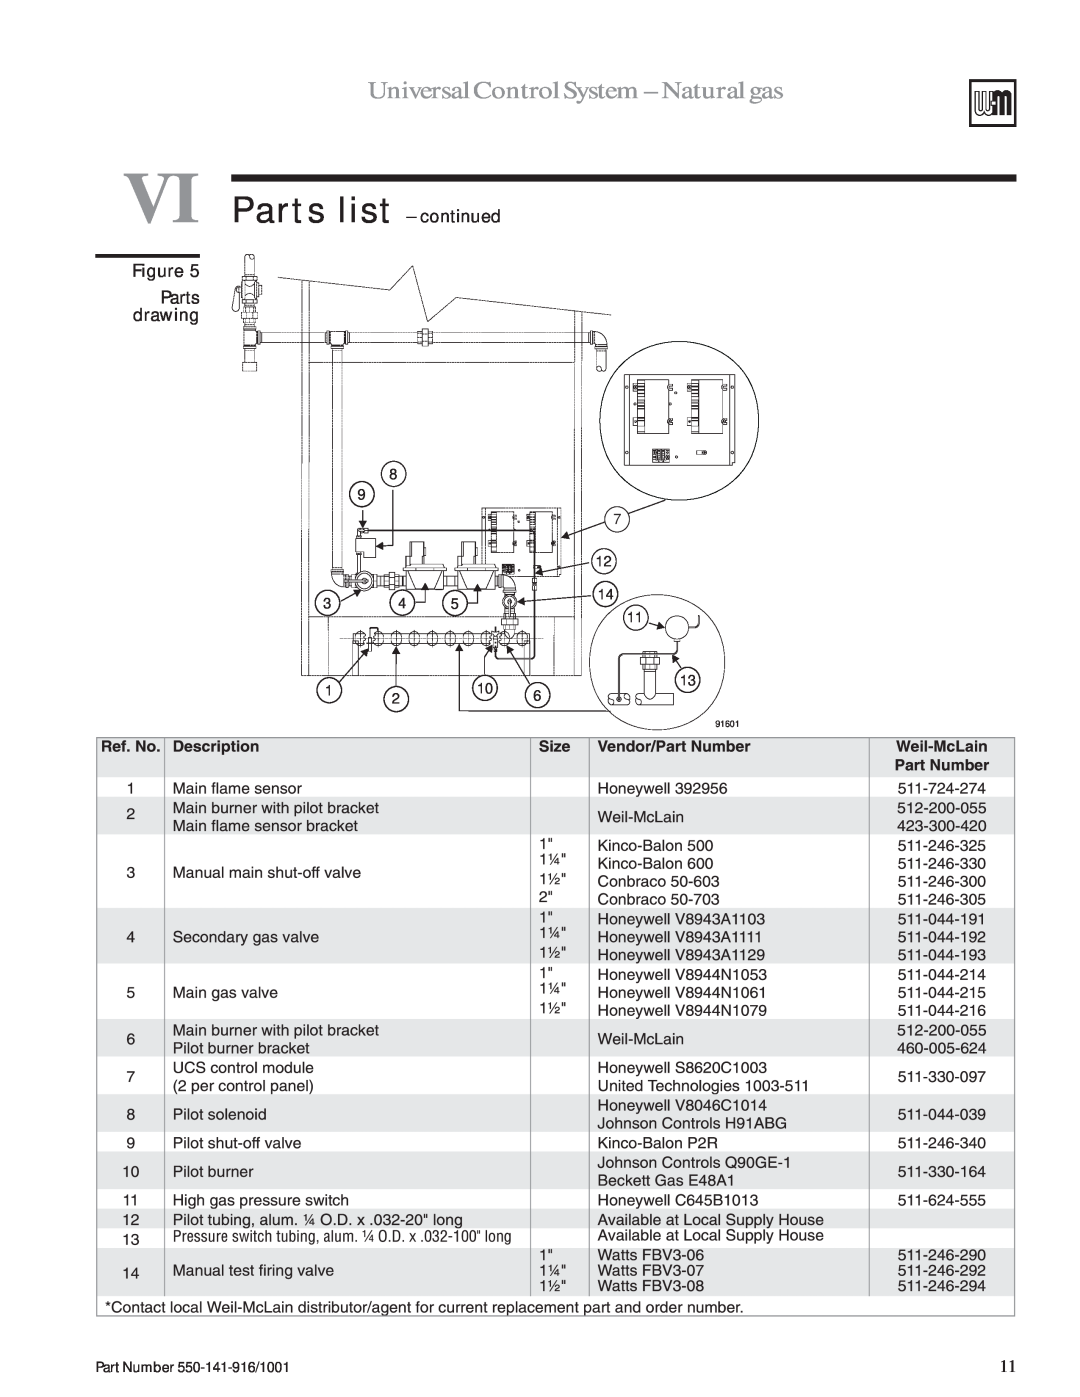 Weil-McLain LGB-23 manual VI Parts list - continued, Parts drawing, Universal Control System - Natural gas 